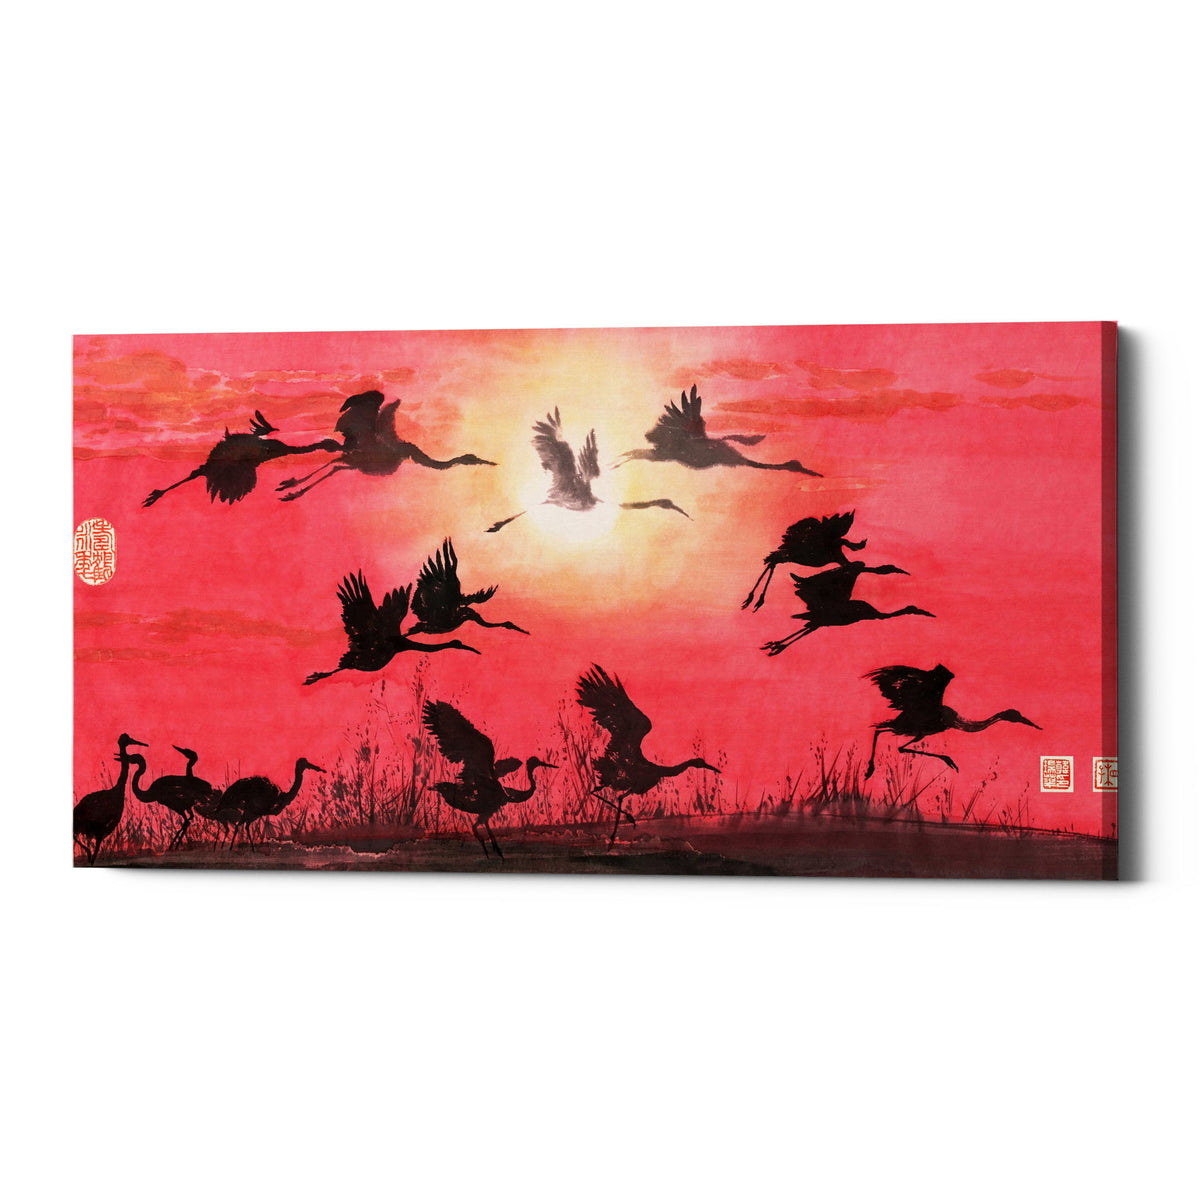 Epic Graffiti &quot;Siege of Cranes&quot; by River Han, Giclee Canvas Wall Art